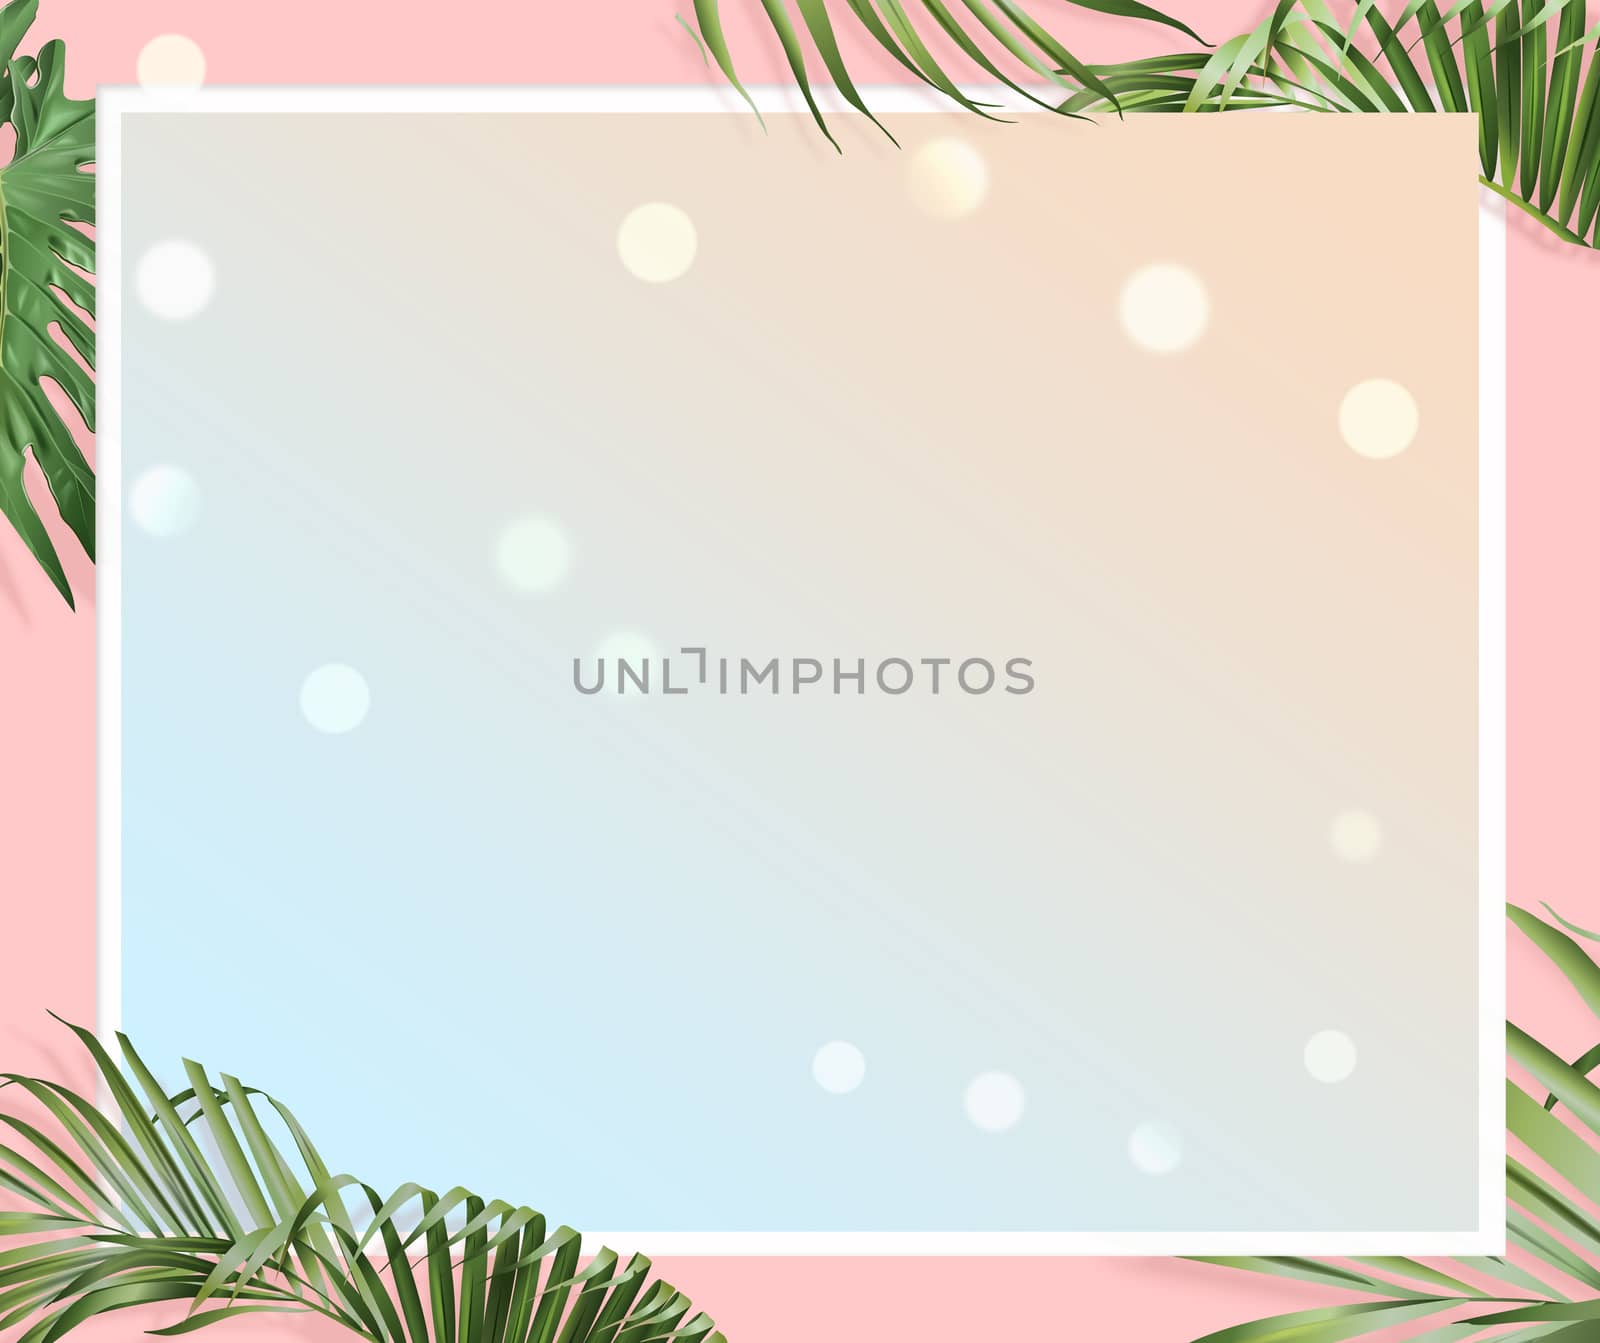 The website banner with pink background, euclidean and palm leaves border